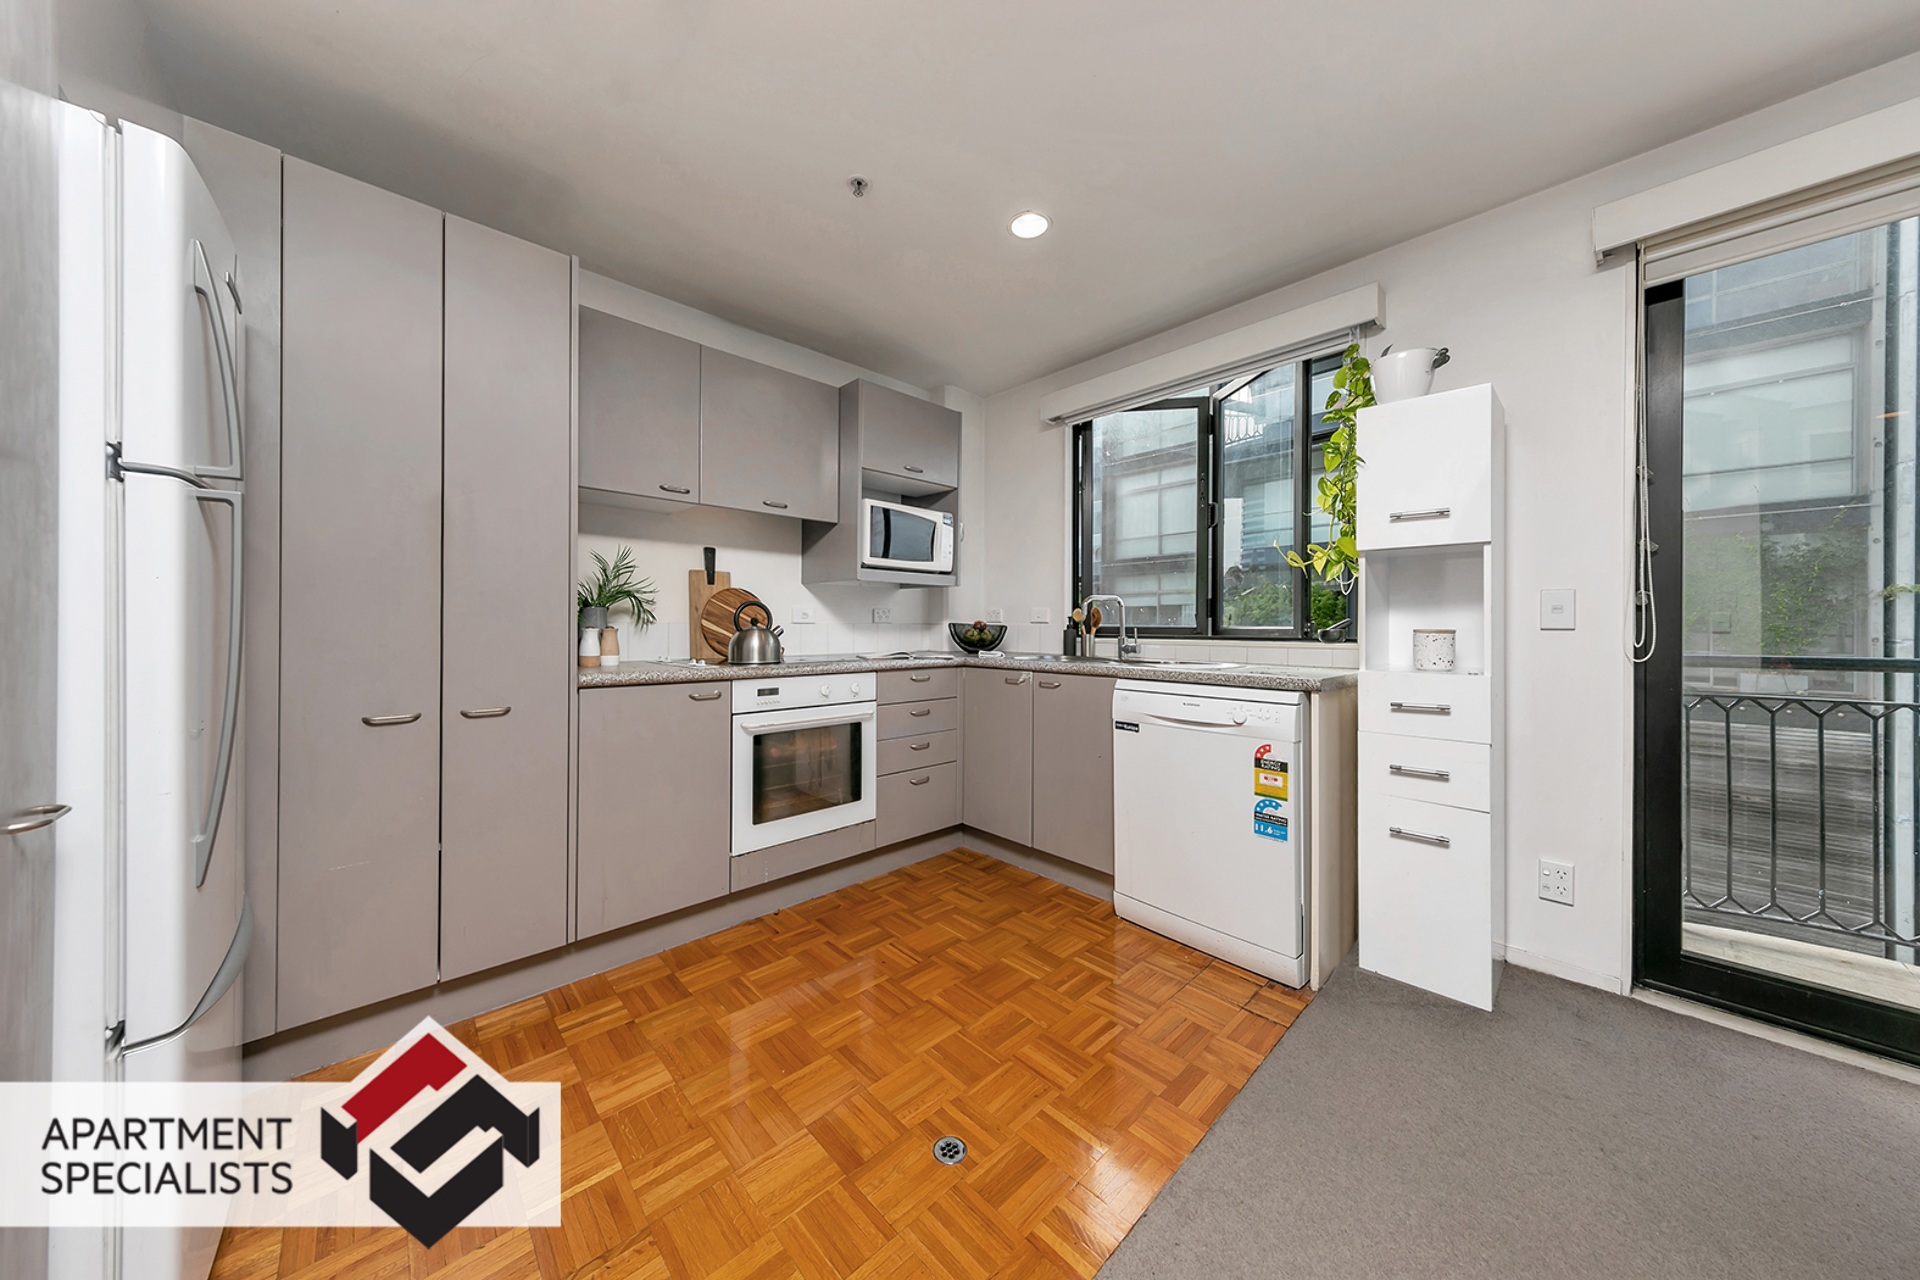 5 | 15 Blake Street, Ponsonby | Apartment Specialists